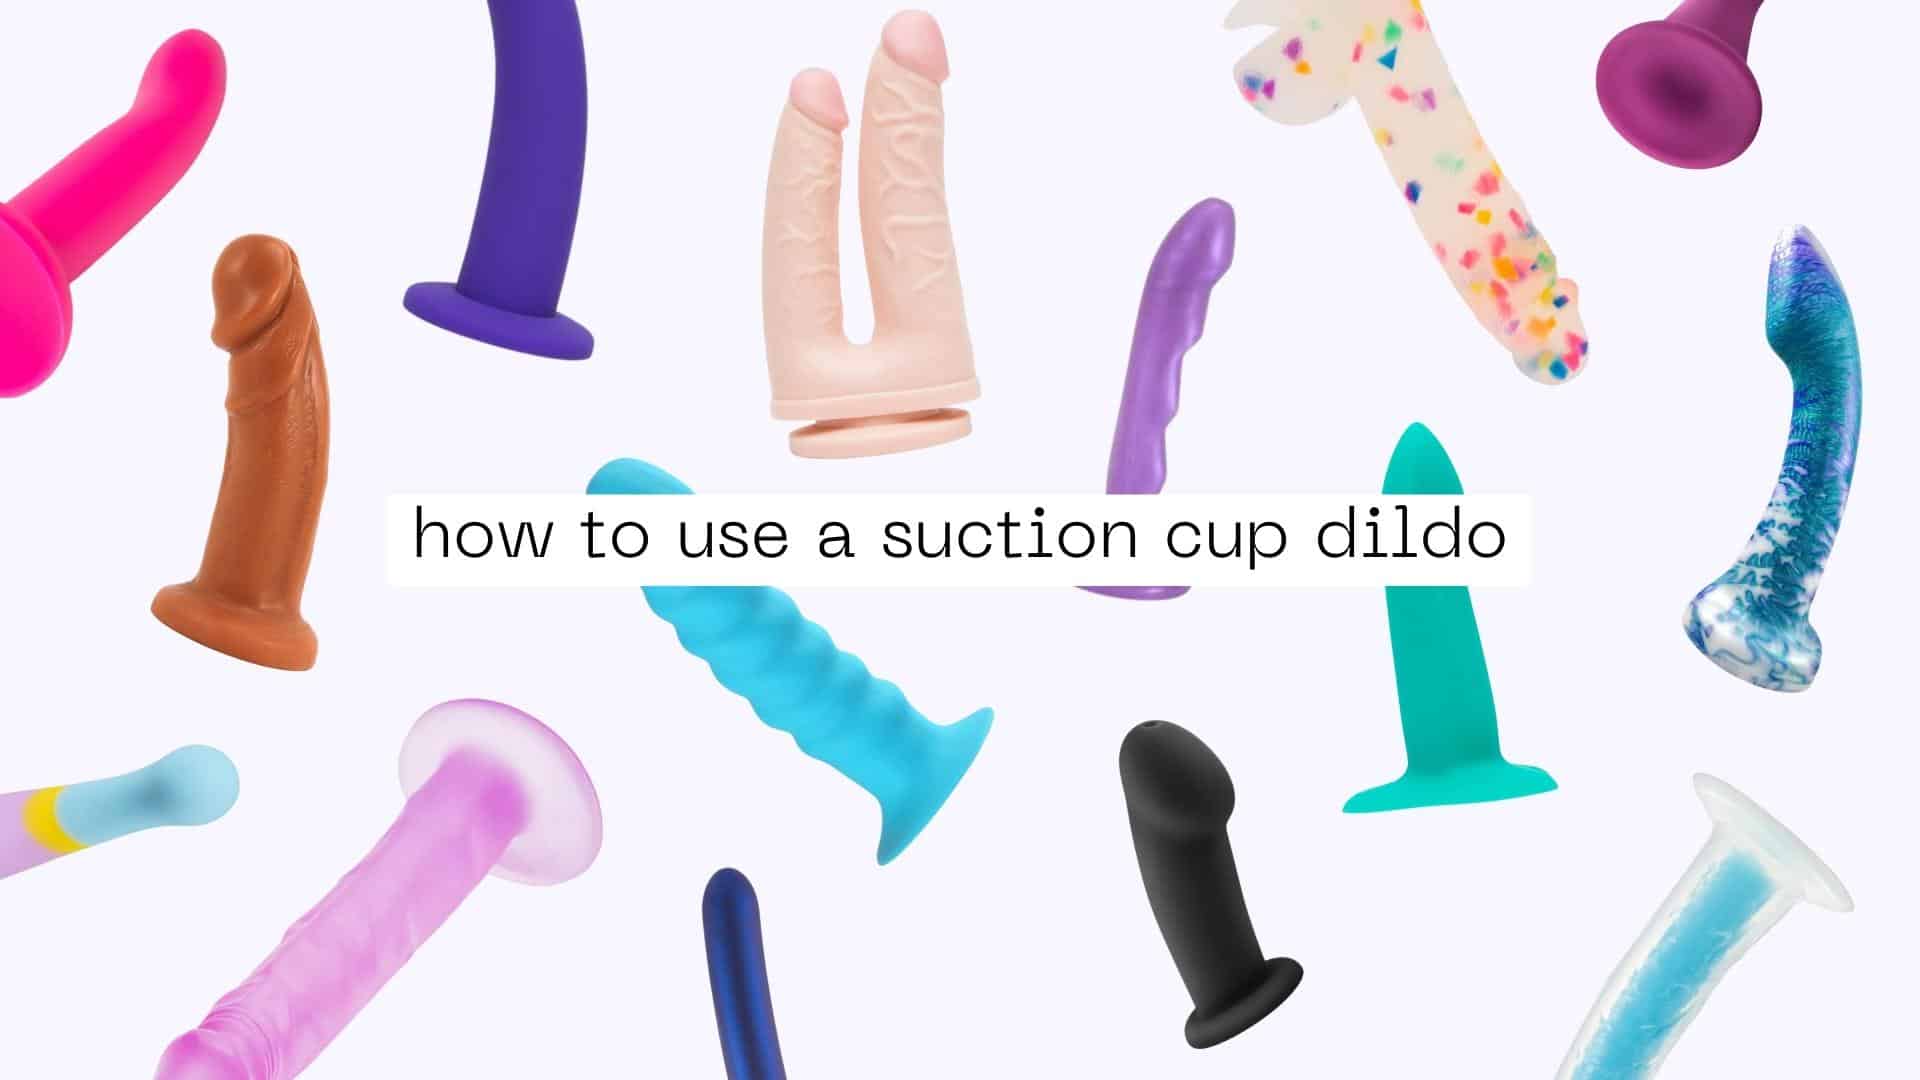 danielle boirum add photo how to use suction cup dildo